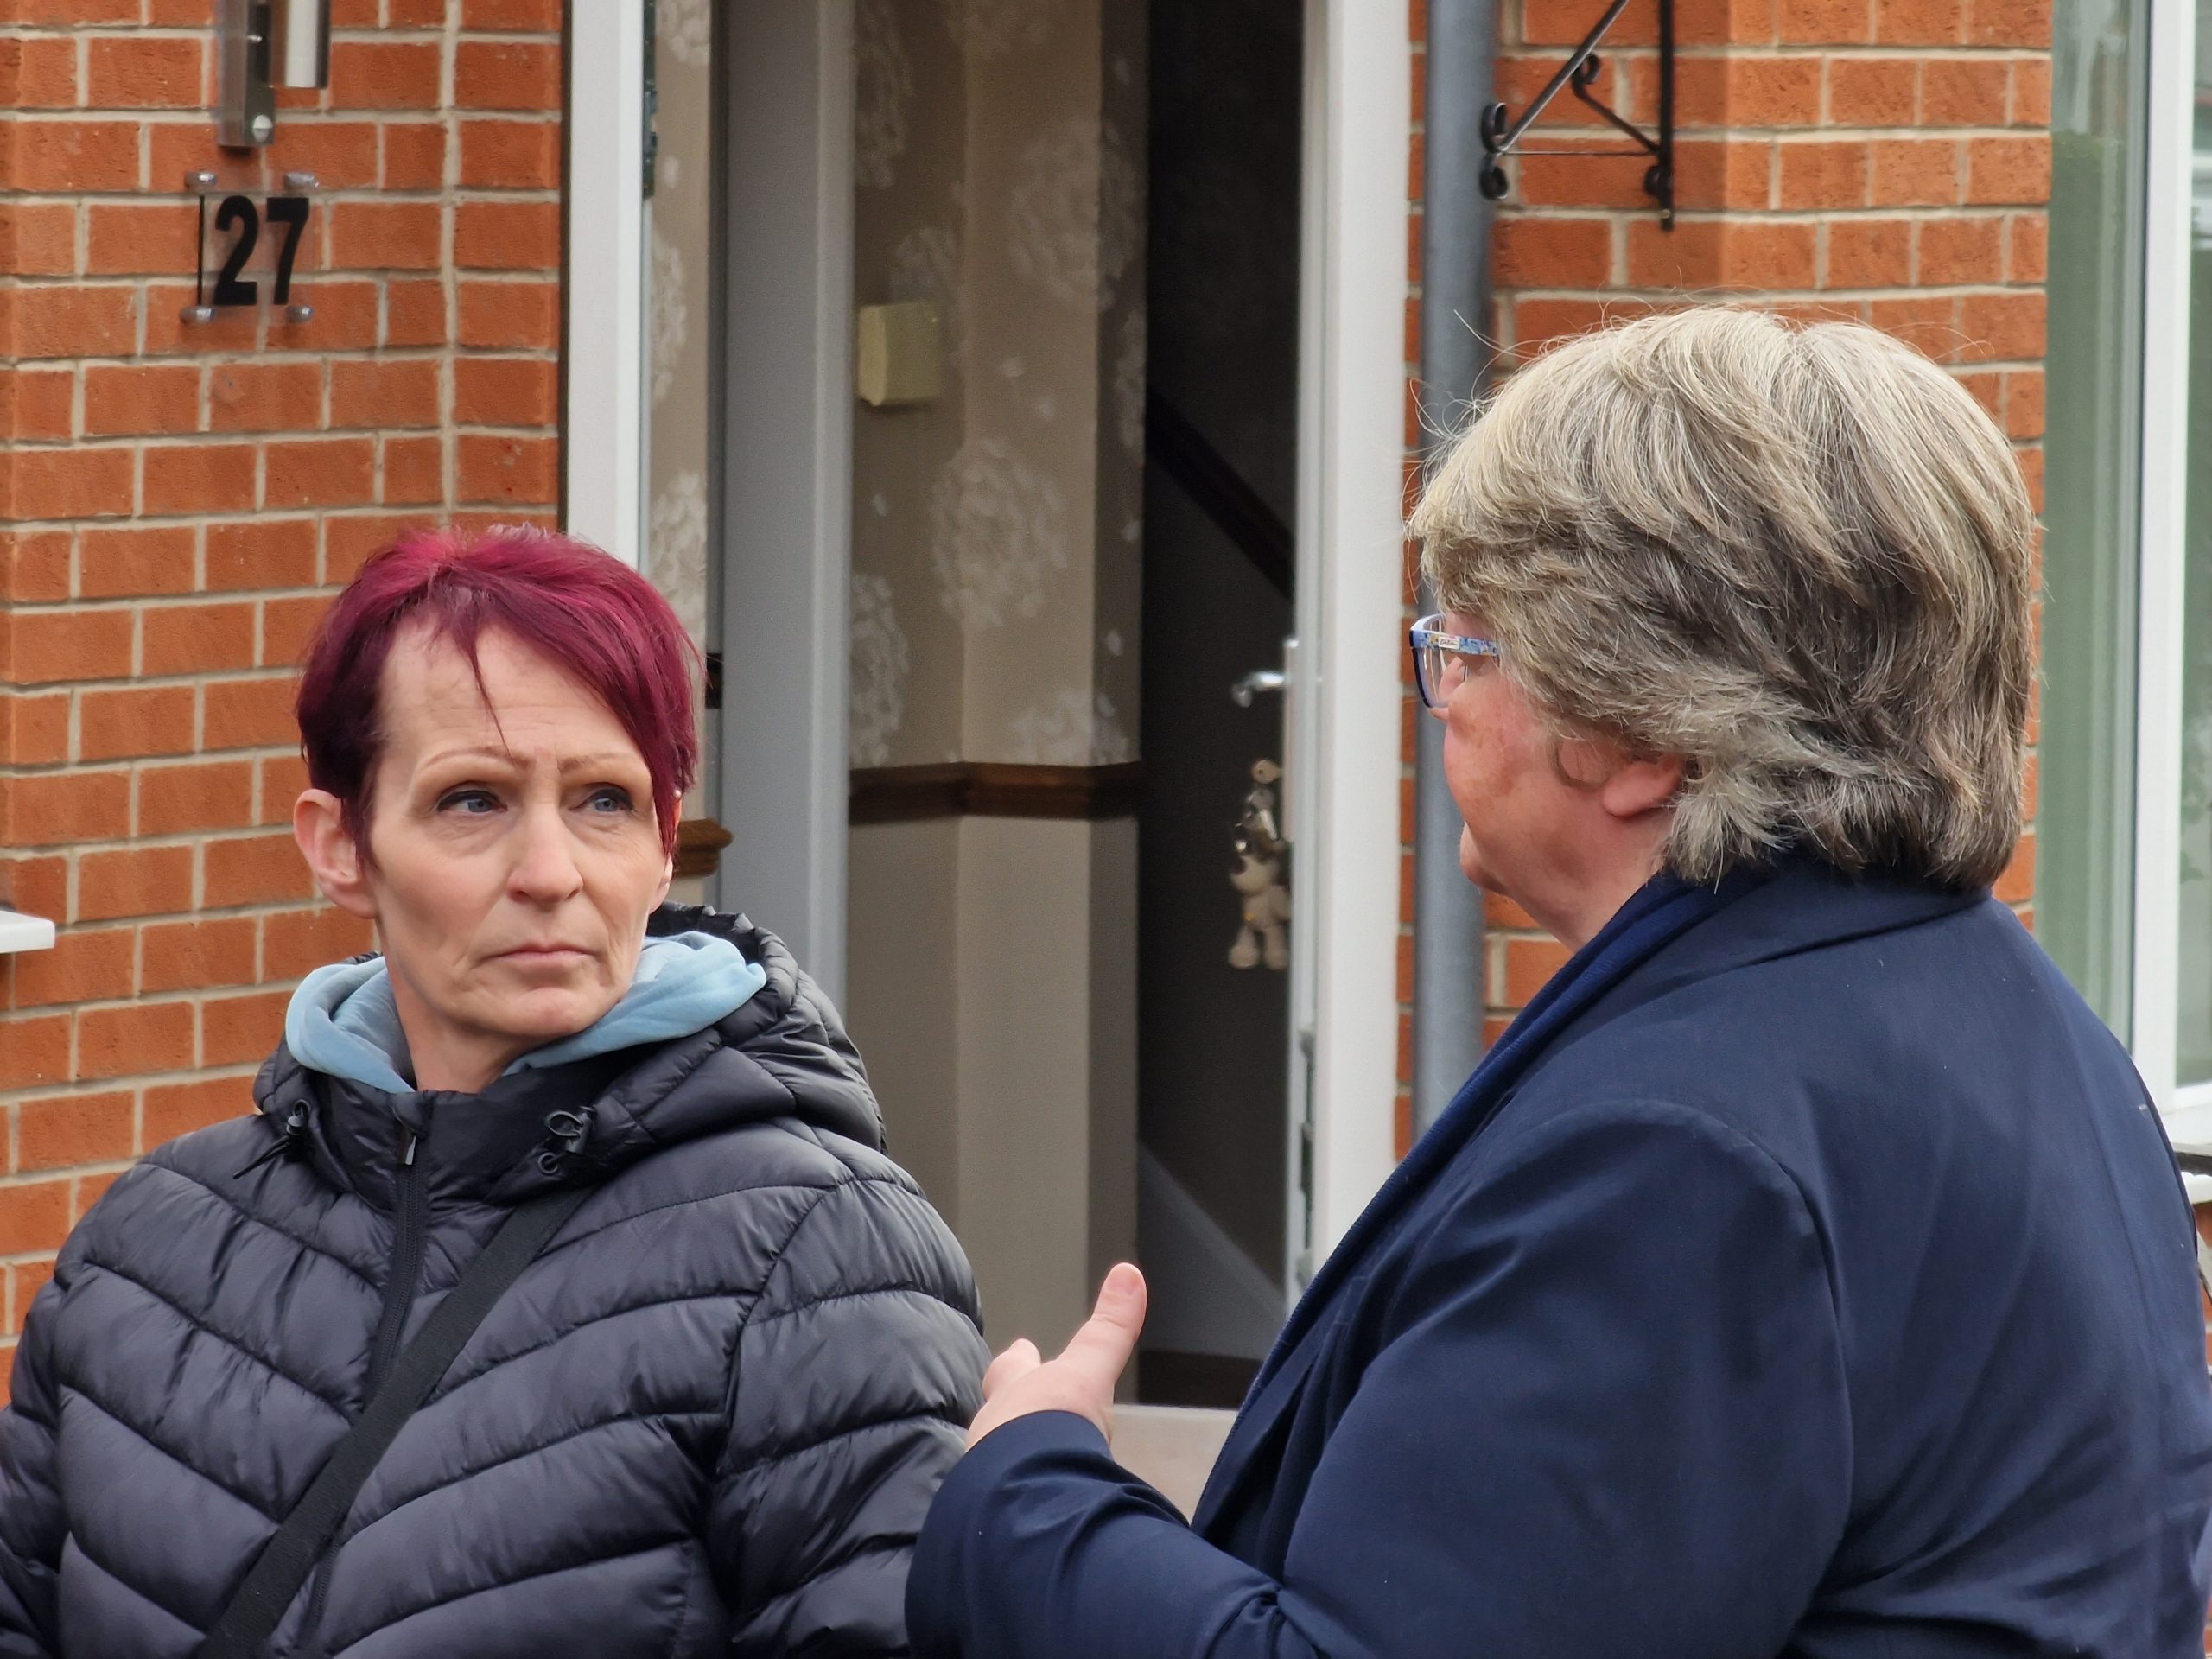 Environment Secretary Therese Coffey right speaks to Darrel Road resident Lucy Rose scaled